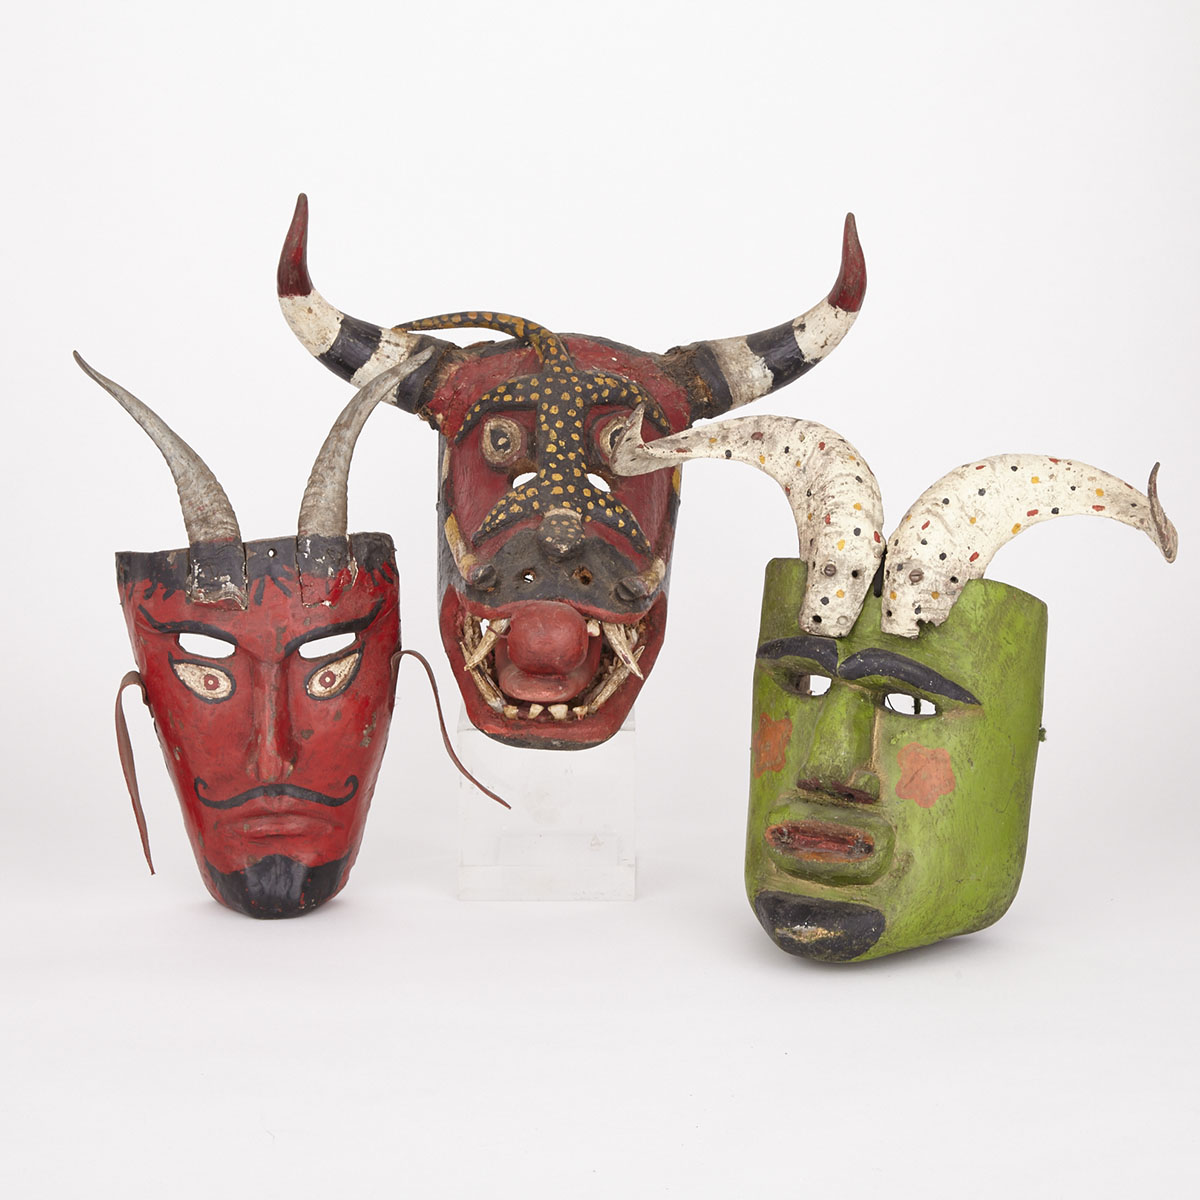 Three Carved and Painted Wood Masks; Devil mask with goat horns, Figurative Mask with ram horns and a zoomorphic mask with bull horns and inset teeth and carved wood canines, Mexico, 20th century